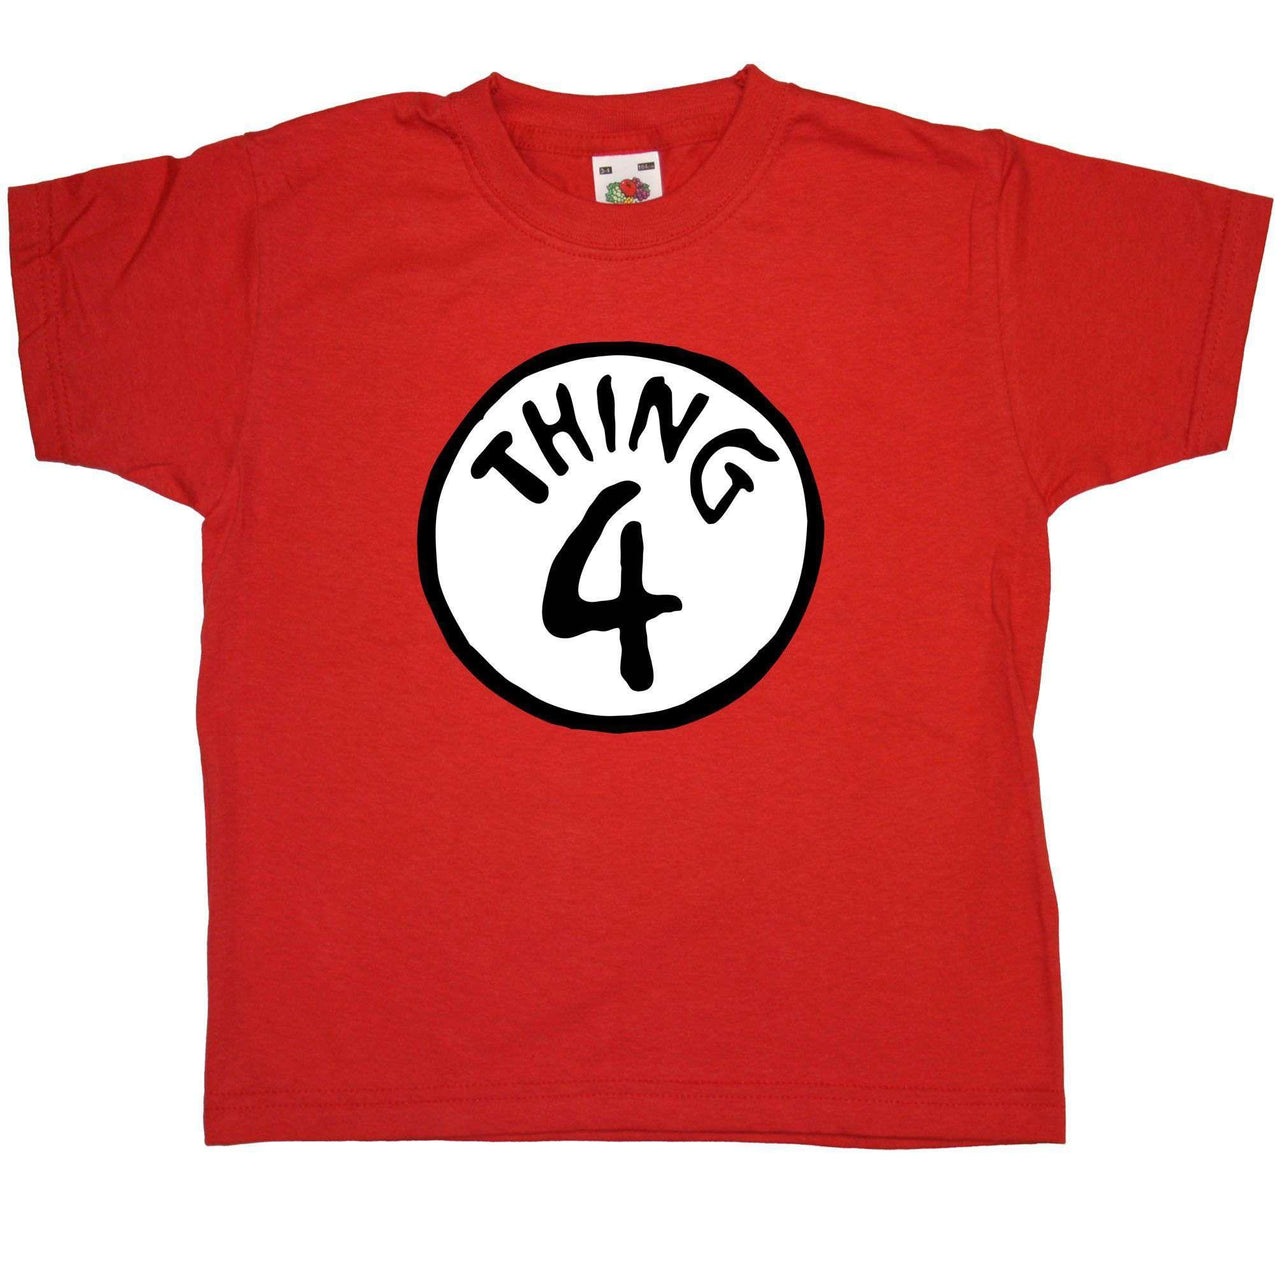 Cat In The Hat Thing 4 Childrens T-Shirt 8Ball